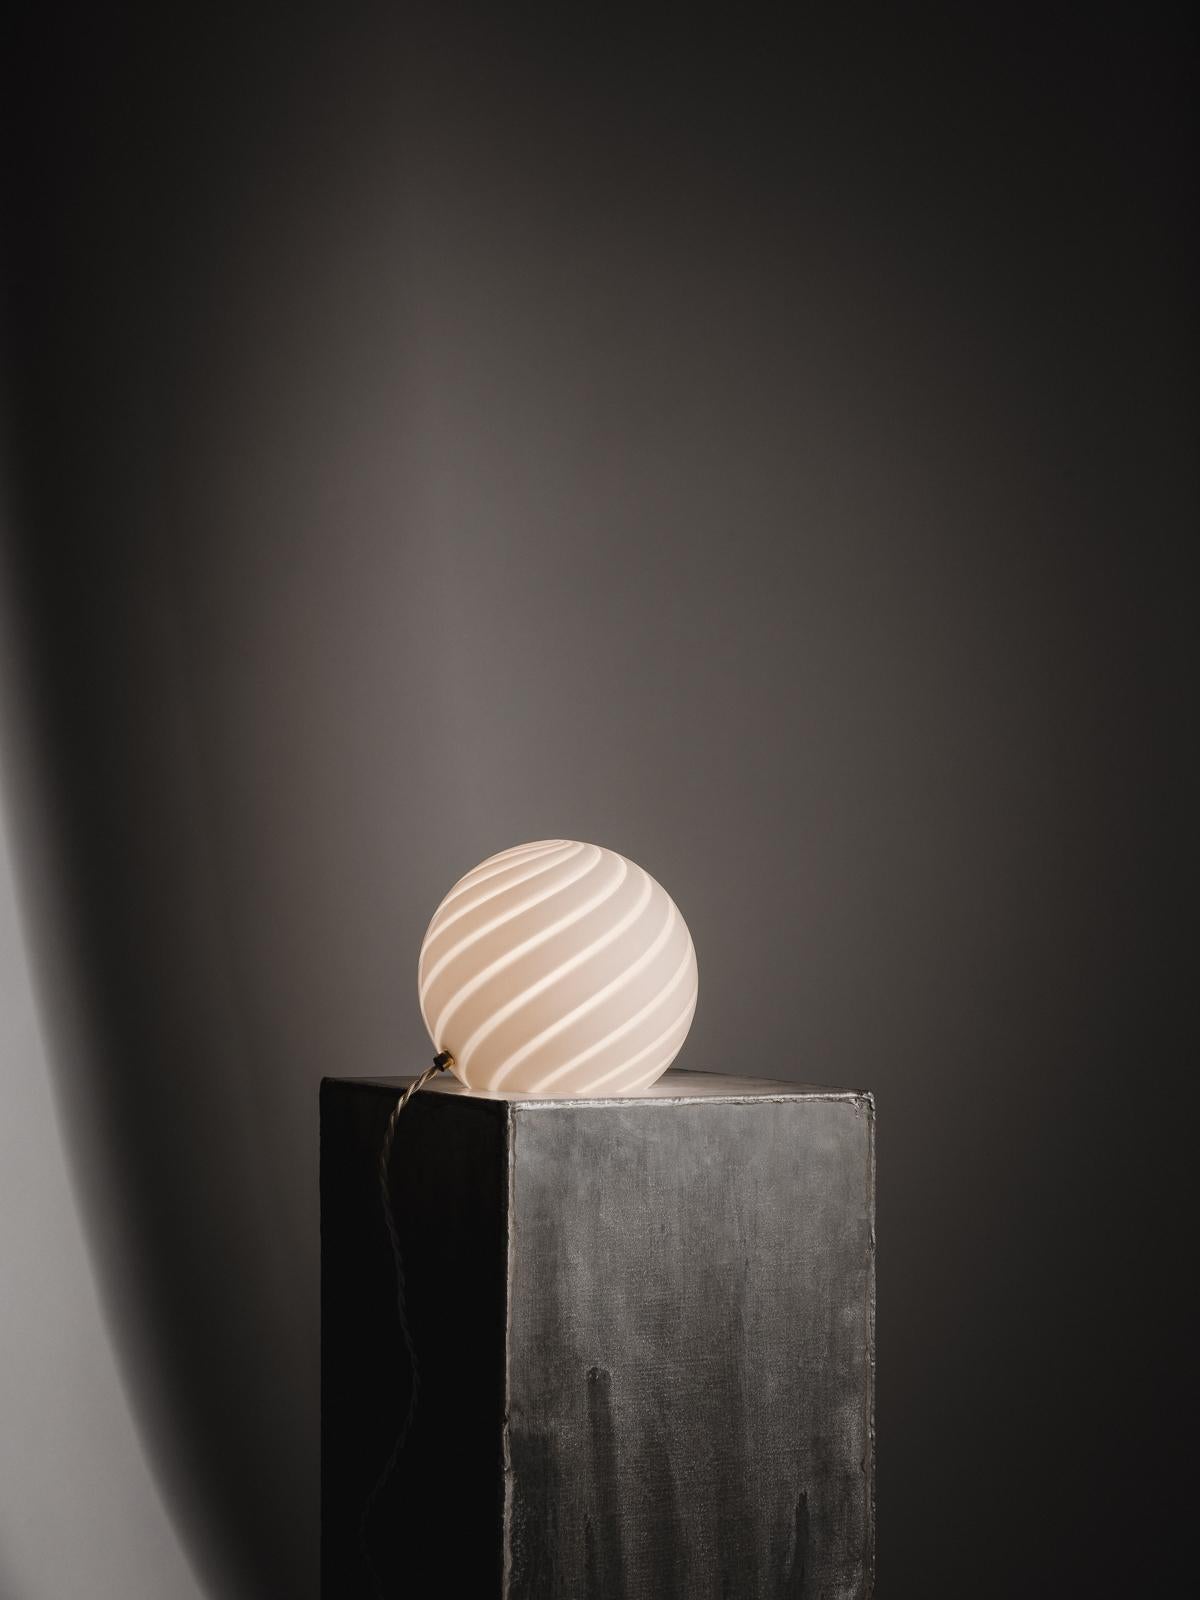 Sphere-shaped table lamp crafted from mouth-blown opaline glass. The design
features a swirl pattern obtained using an original 1970s mould, specifically picked to give the lamp a clean expression. The piece includes hand-casted brass